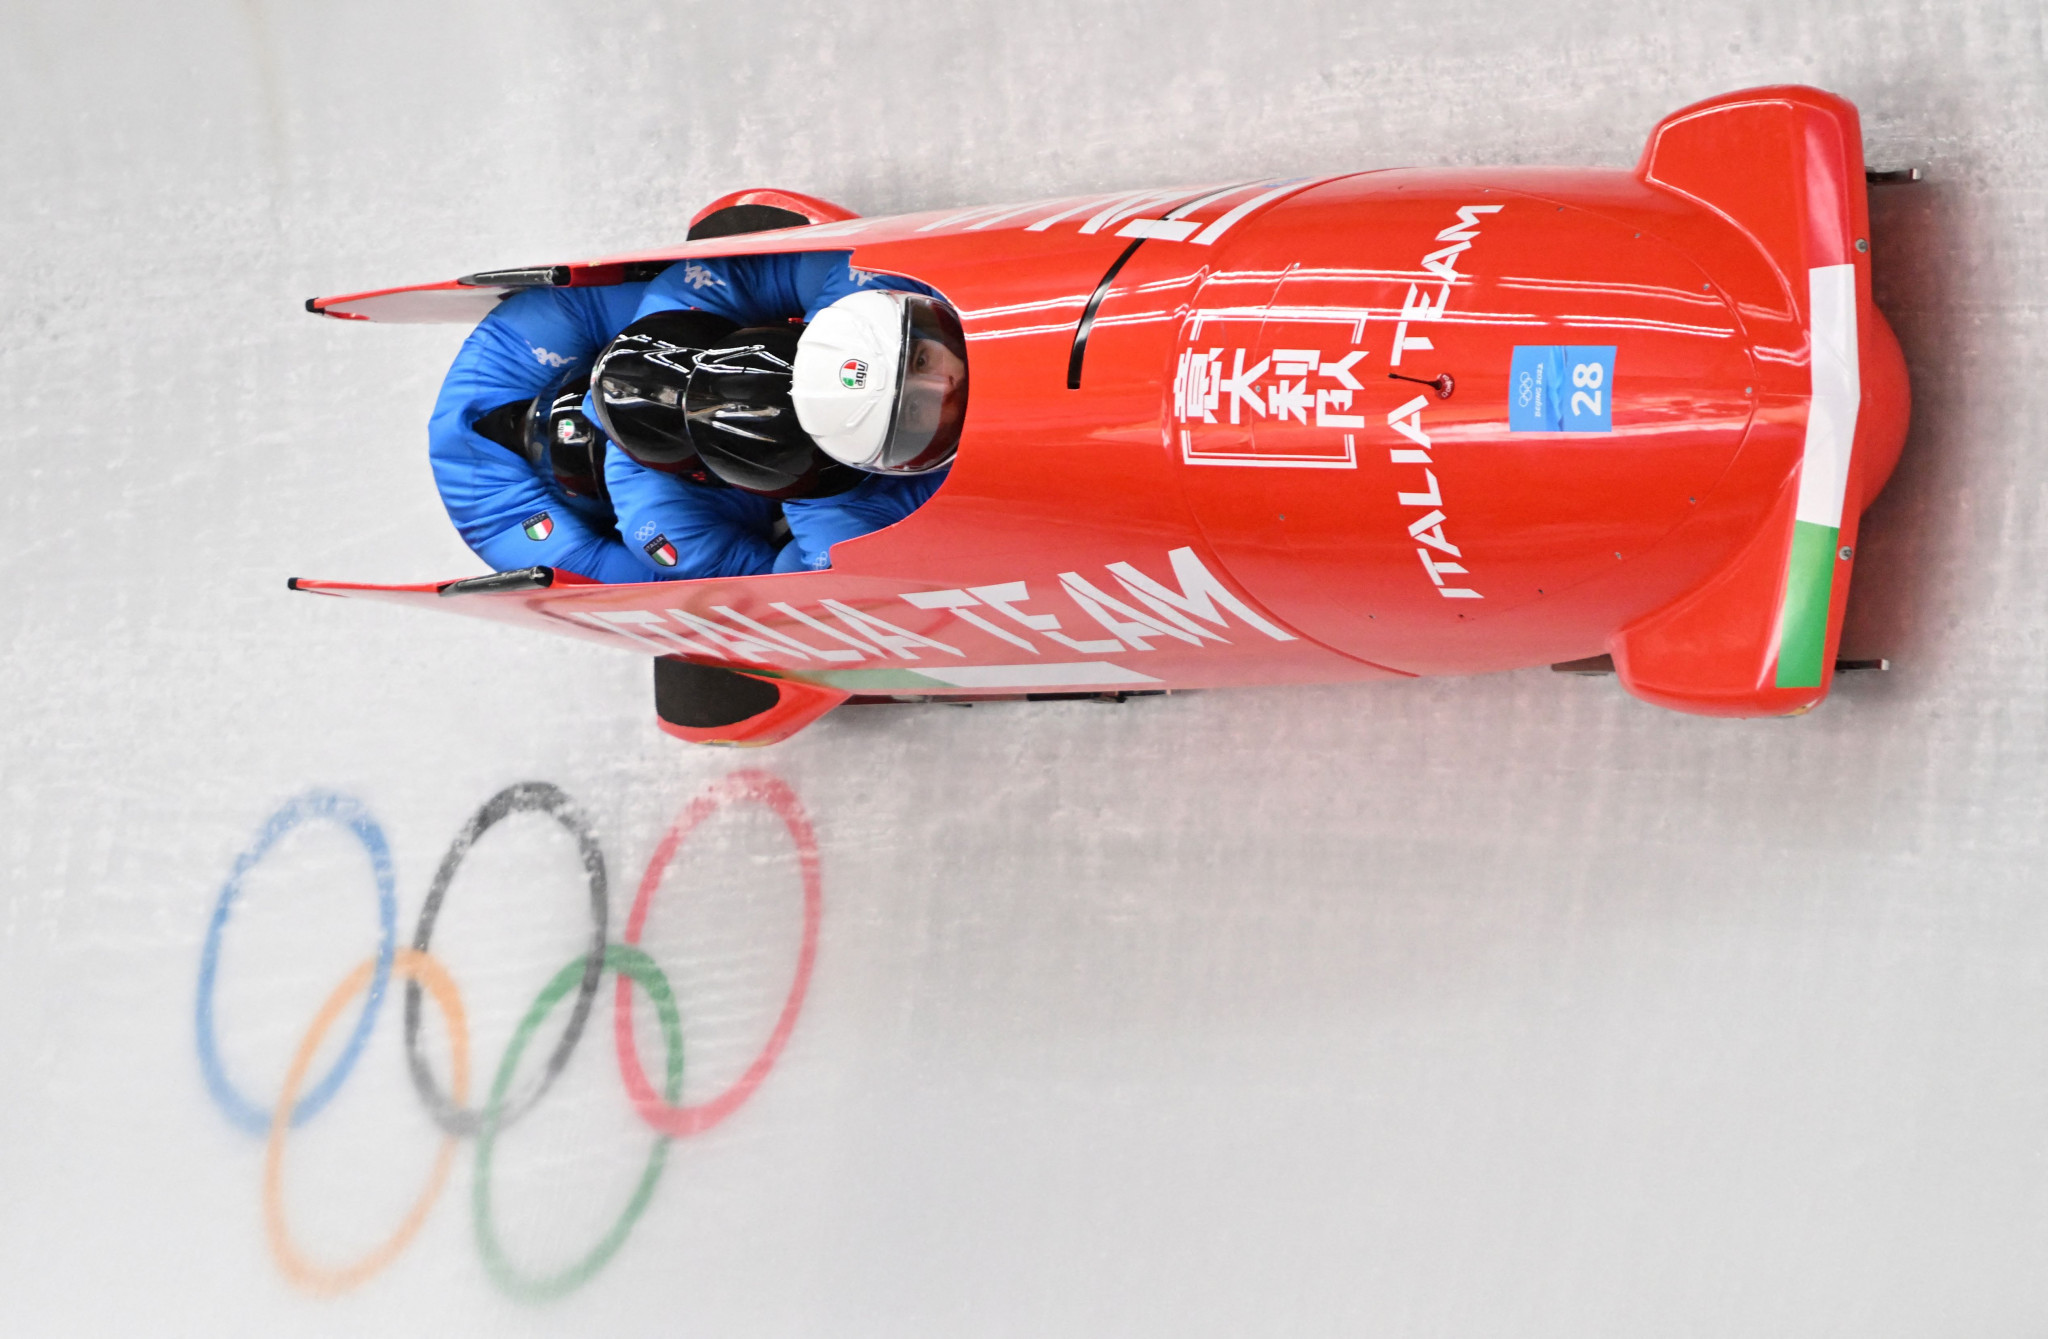 Italy is seeking to recruit athletes to its bobsleigh and skeleton teams ©Getty Images